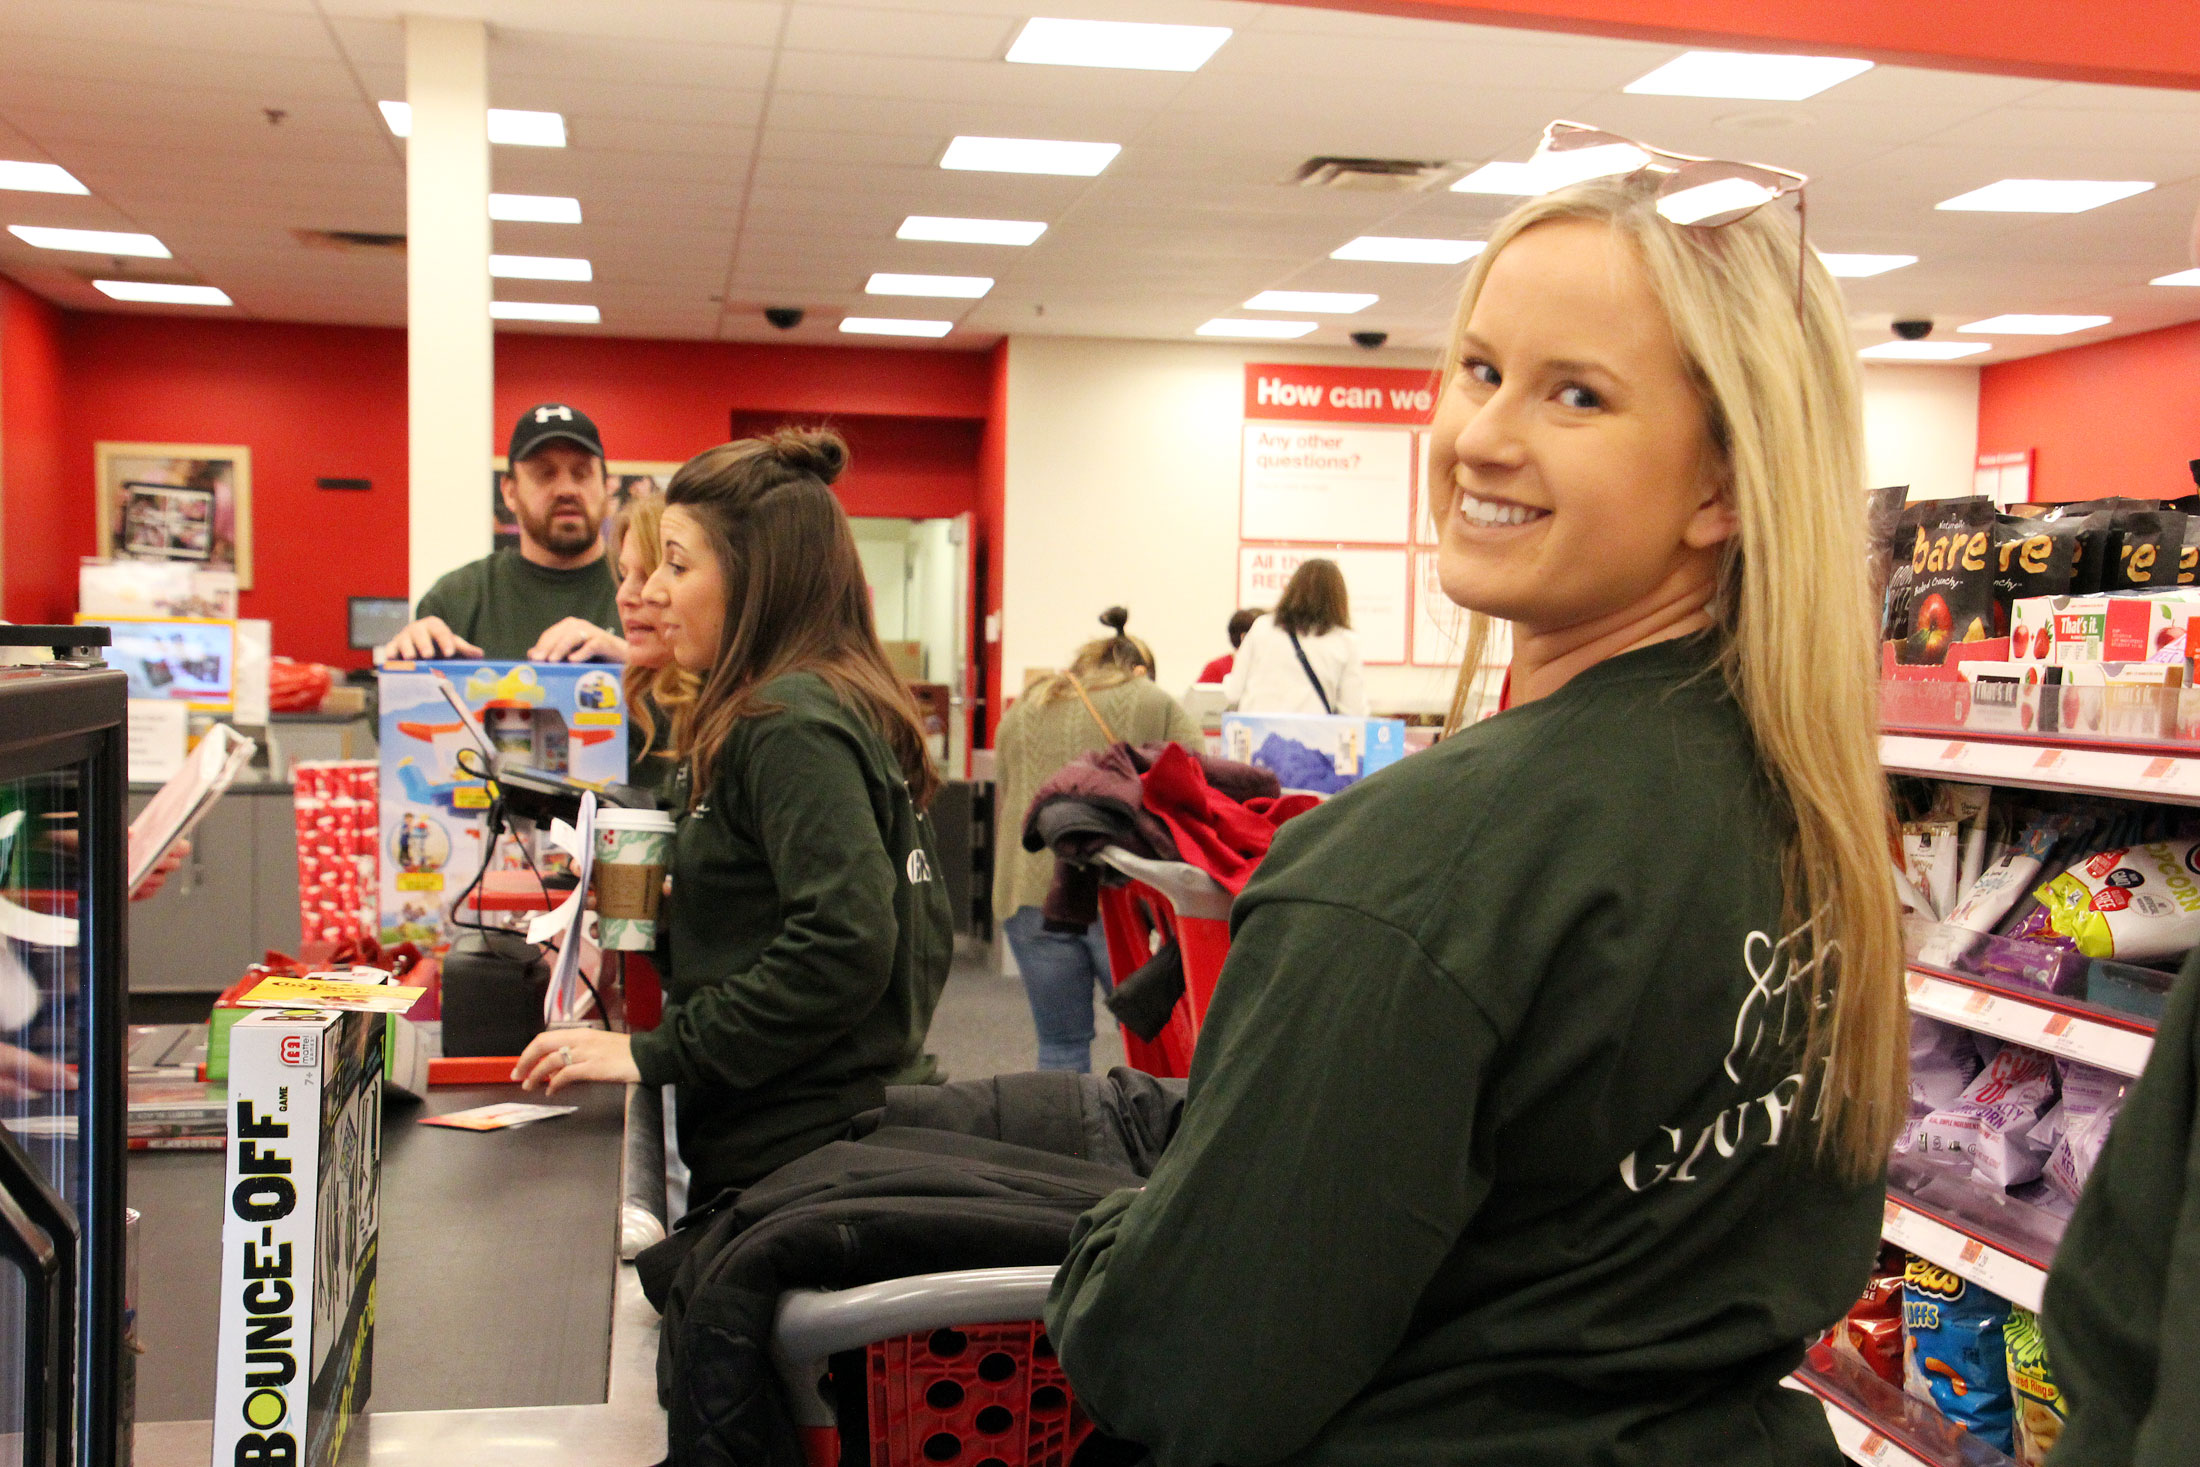 SEG staff cashes out their holiday purchases at Target